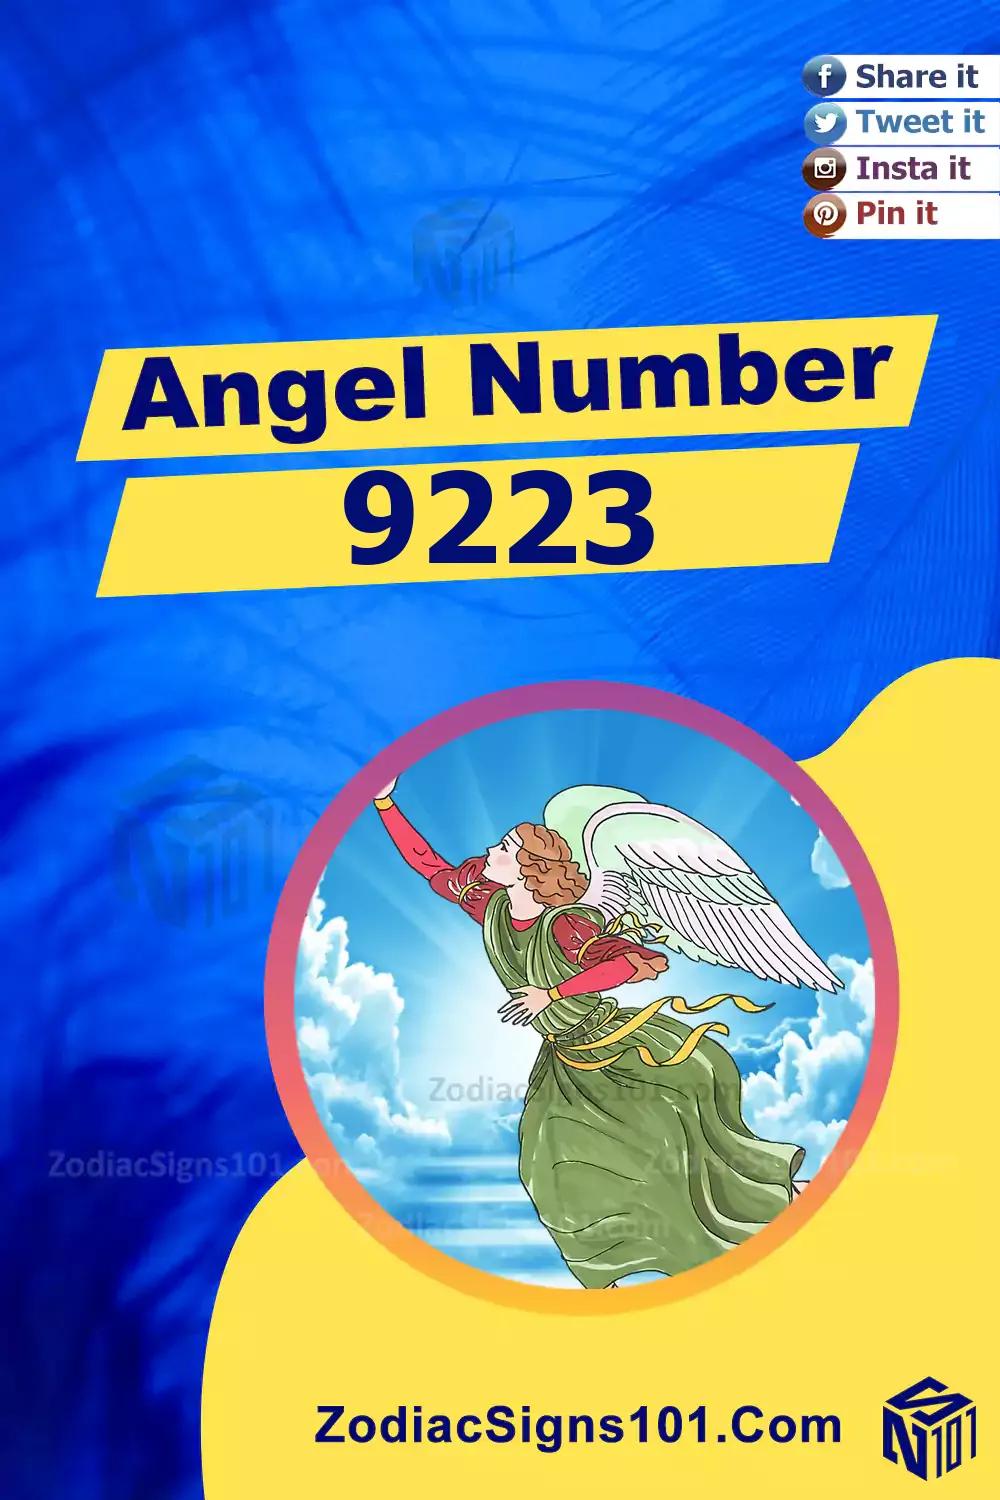 9223 Angel Number Meaning